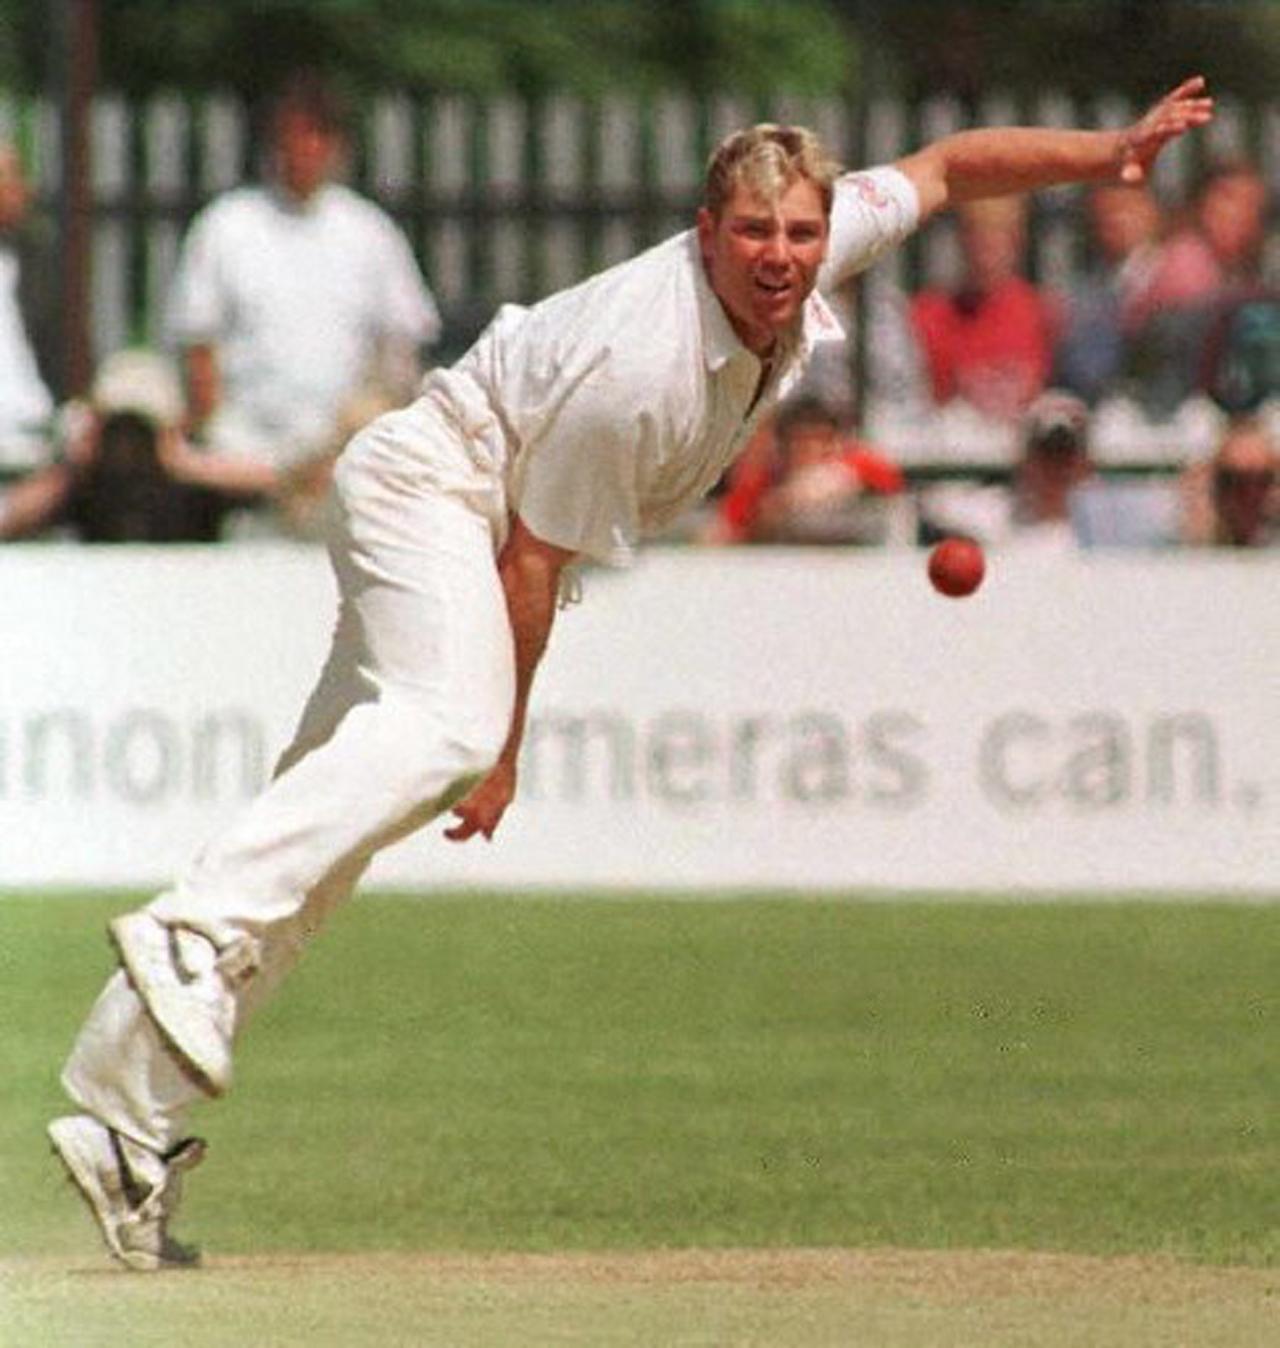 Shane Warne made his Test debut on January 2, 1992 against India. He played his last Test exactly 15 years later on January 2, 2007 against England. 